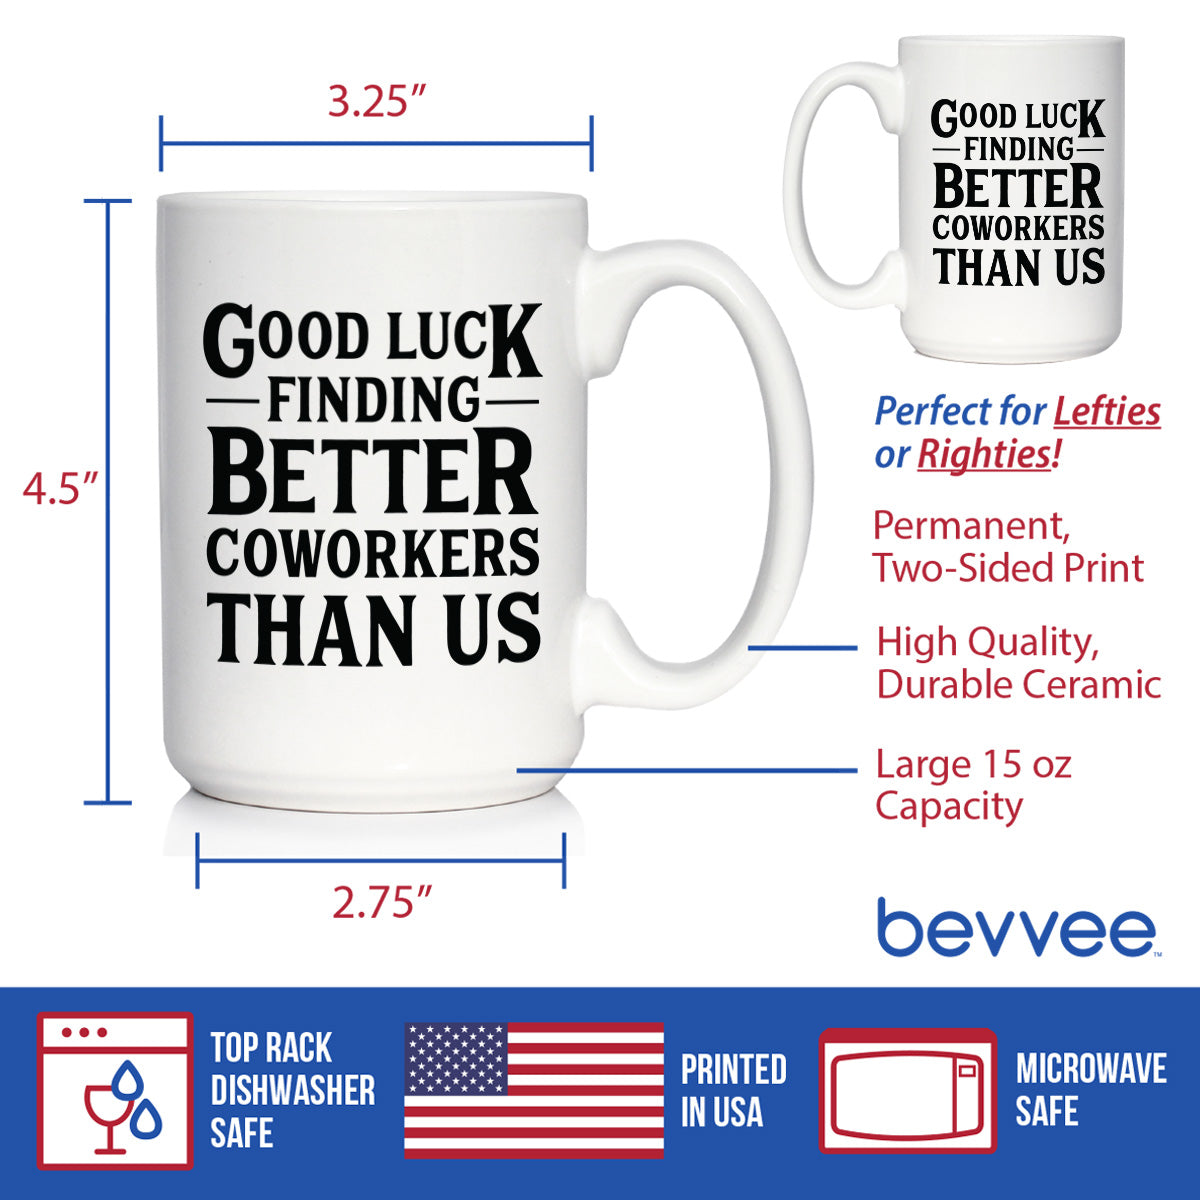 Good Luck Finding Better Coworkers Than Us - Funny Coffee Mug Gift for Coworker - Large 15 Oz Ceramic Coffee Cup